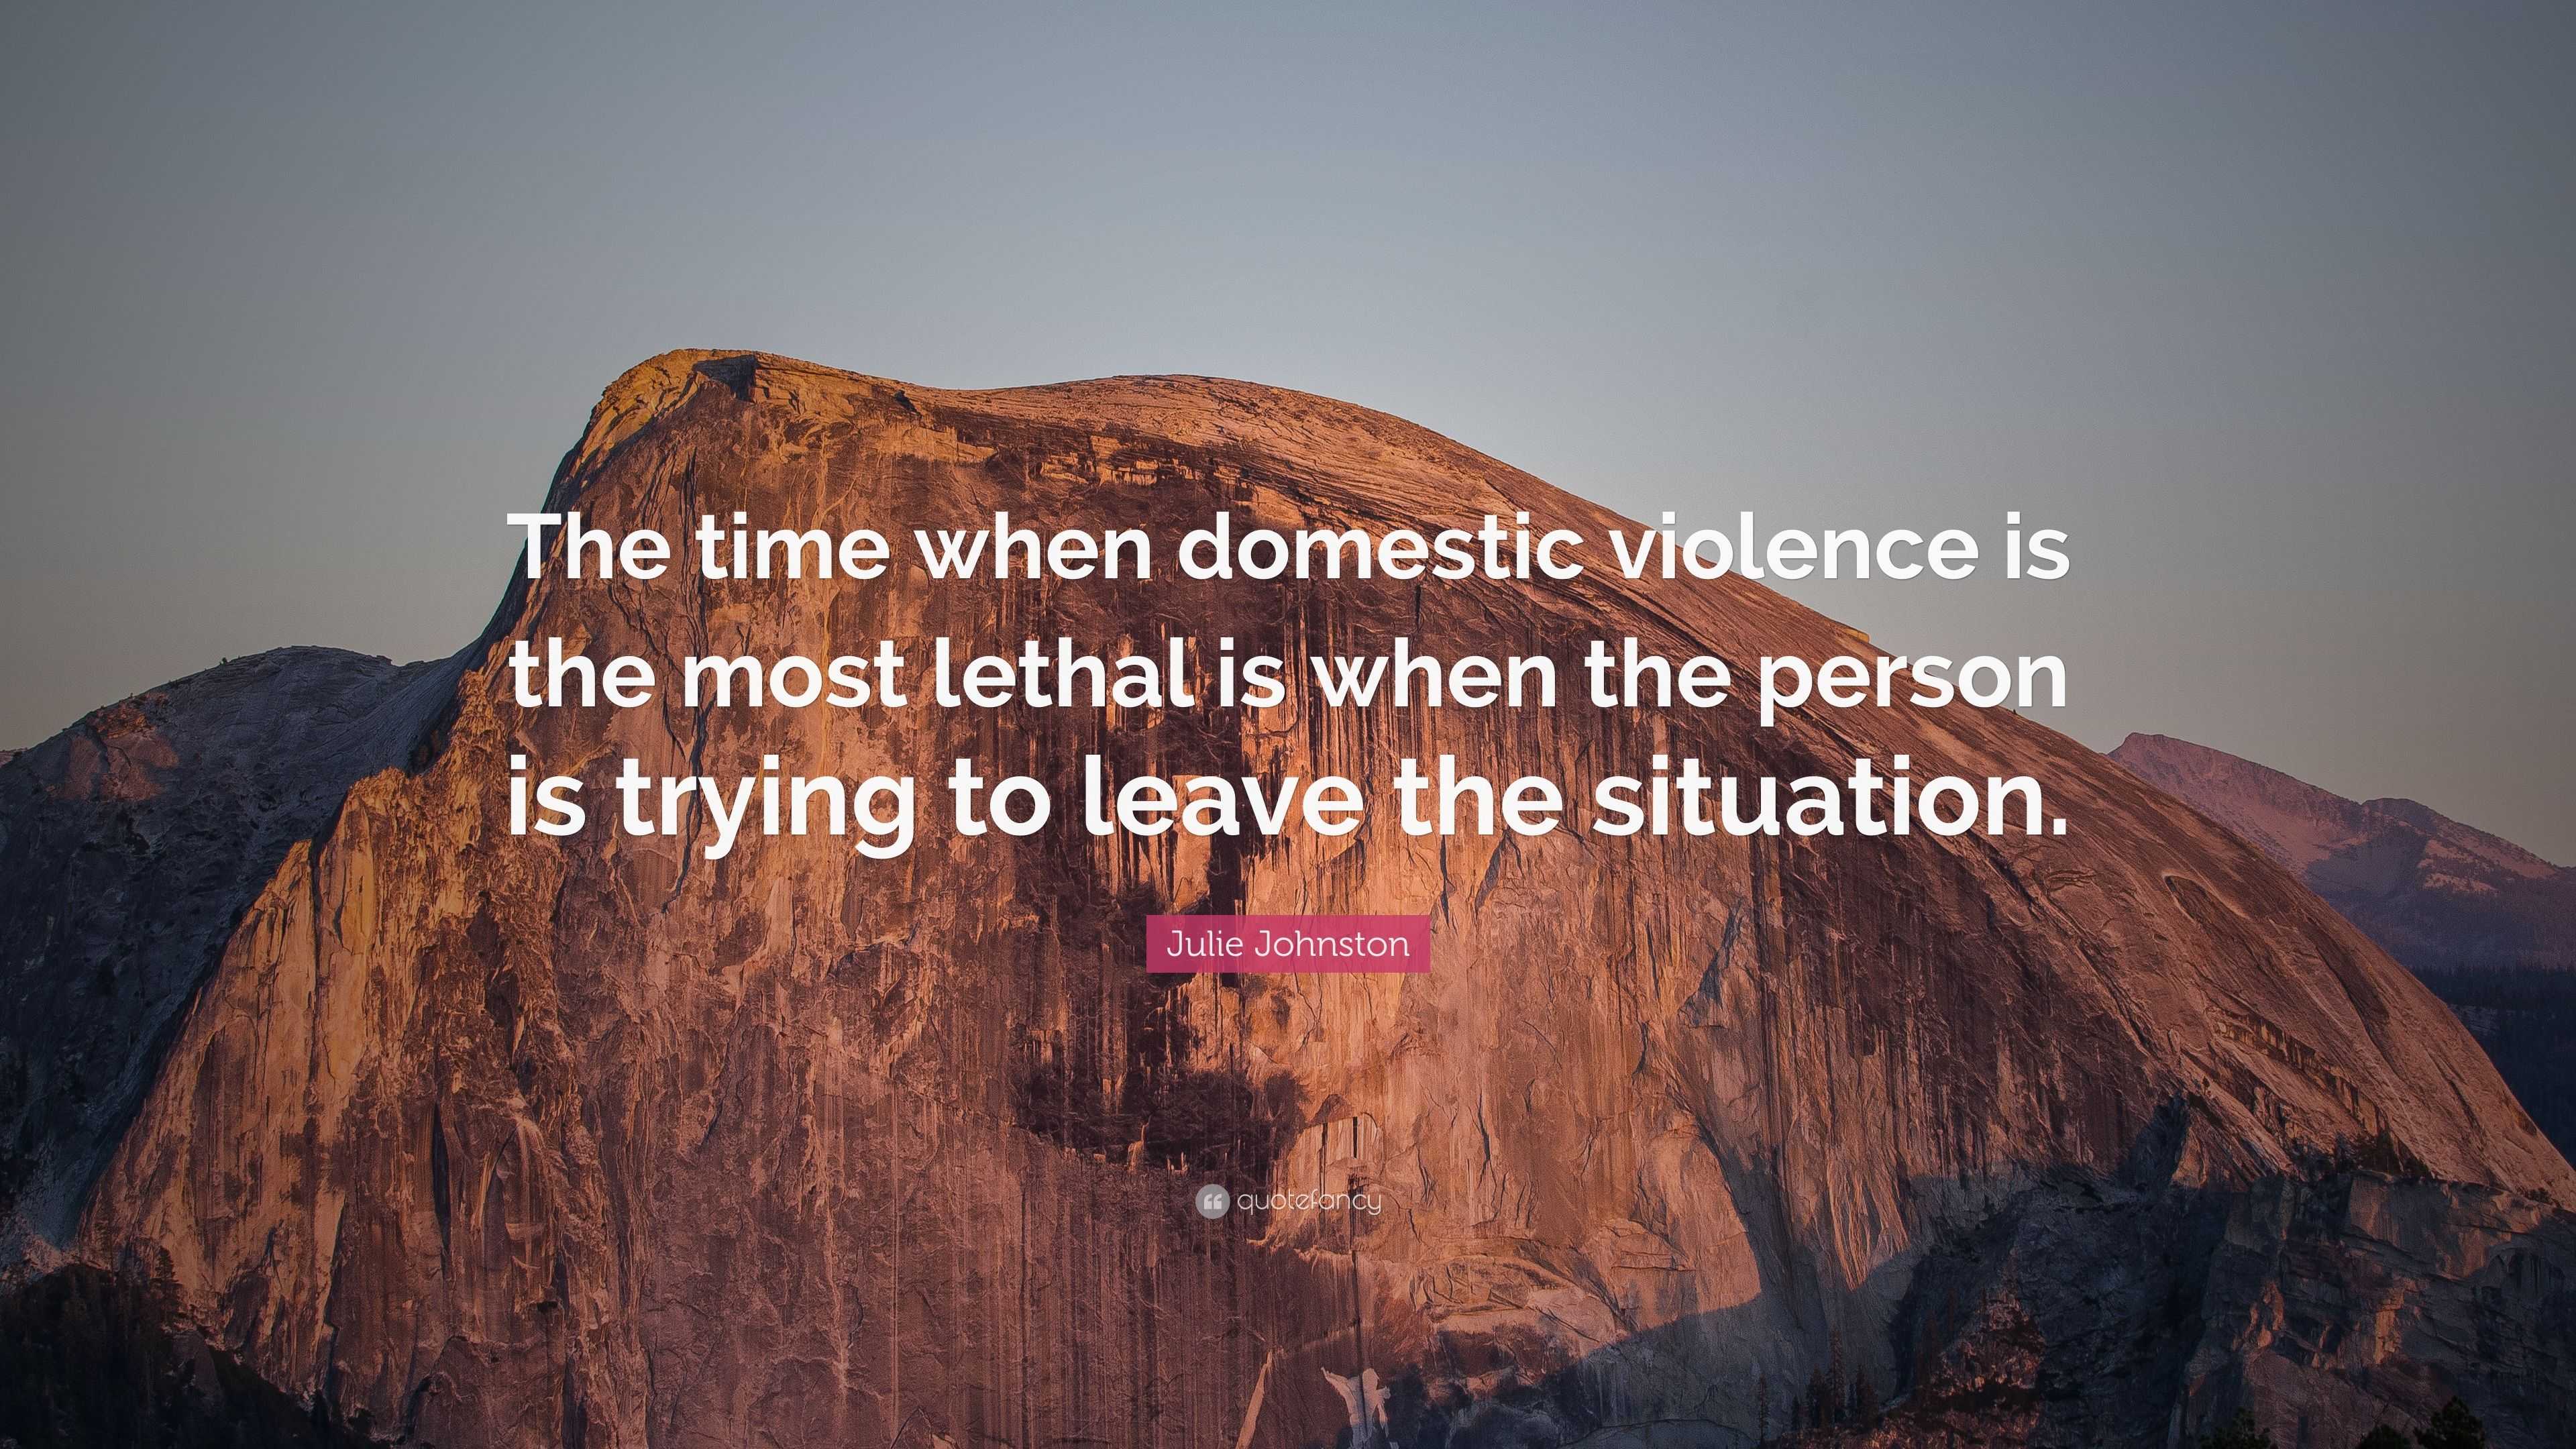 Julie Johnston Quote: “The time when domestic violence is the most